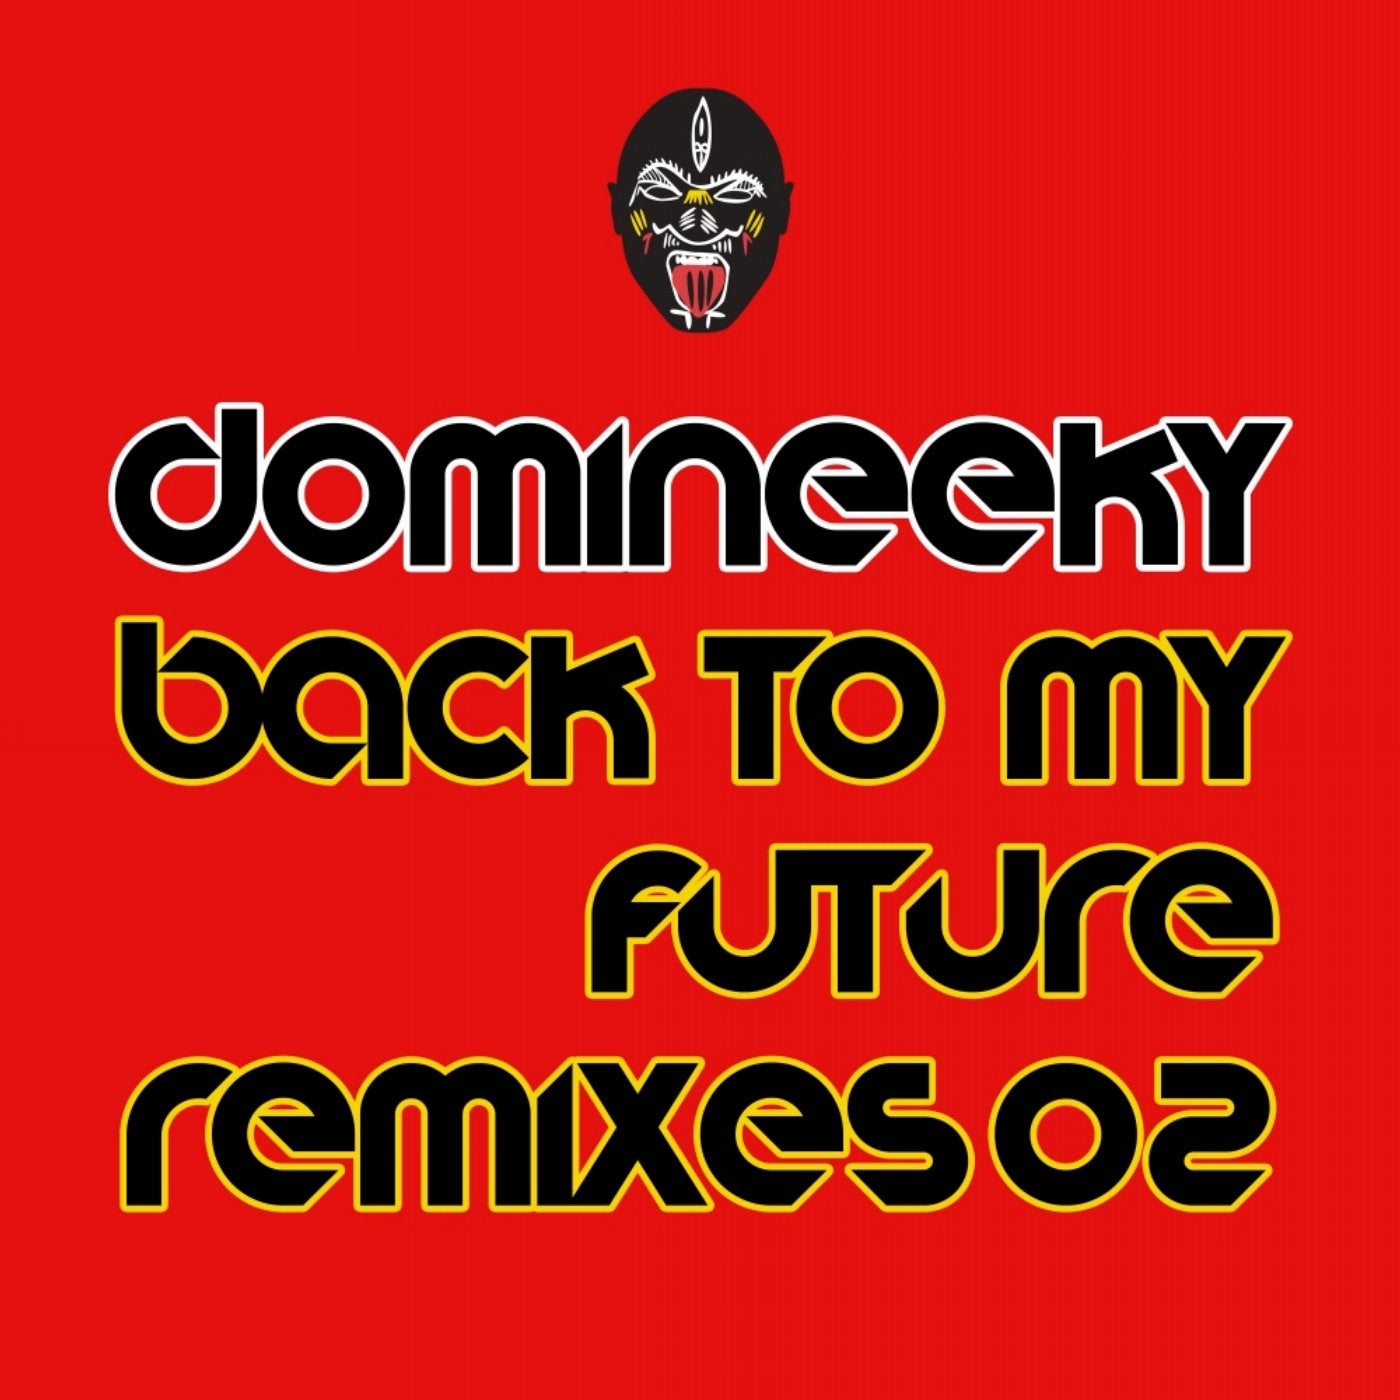 Back To My Future Remixes 02